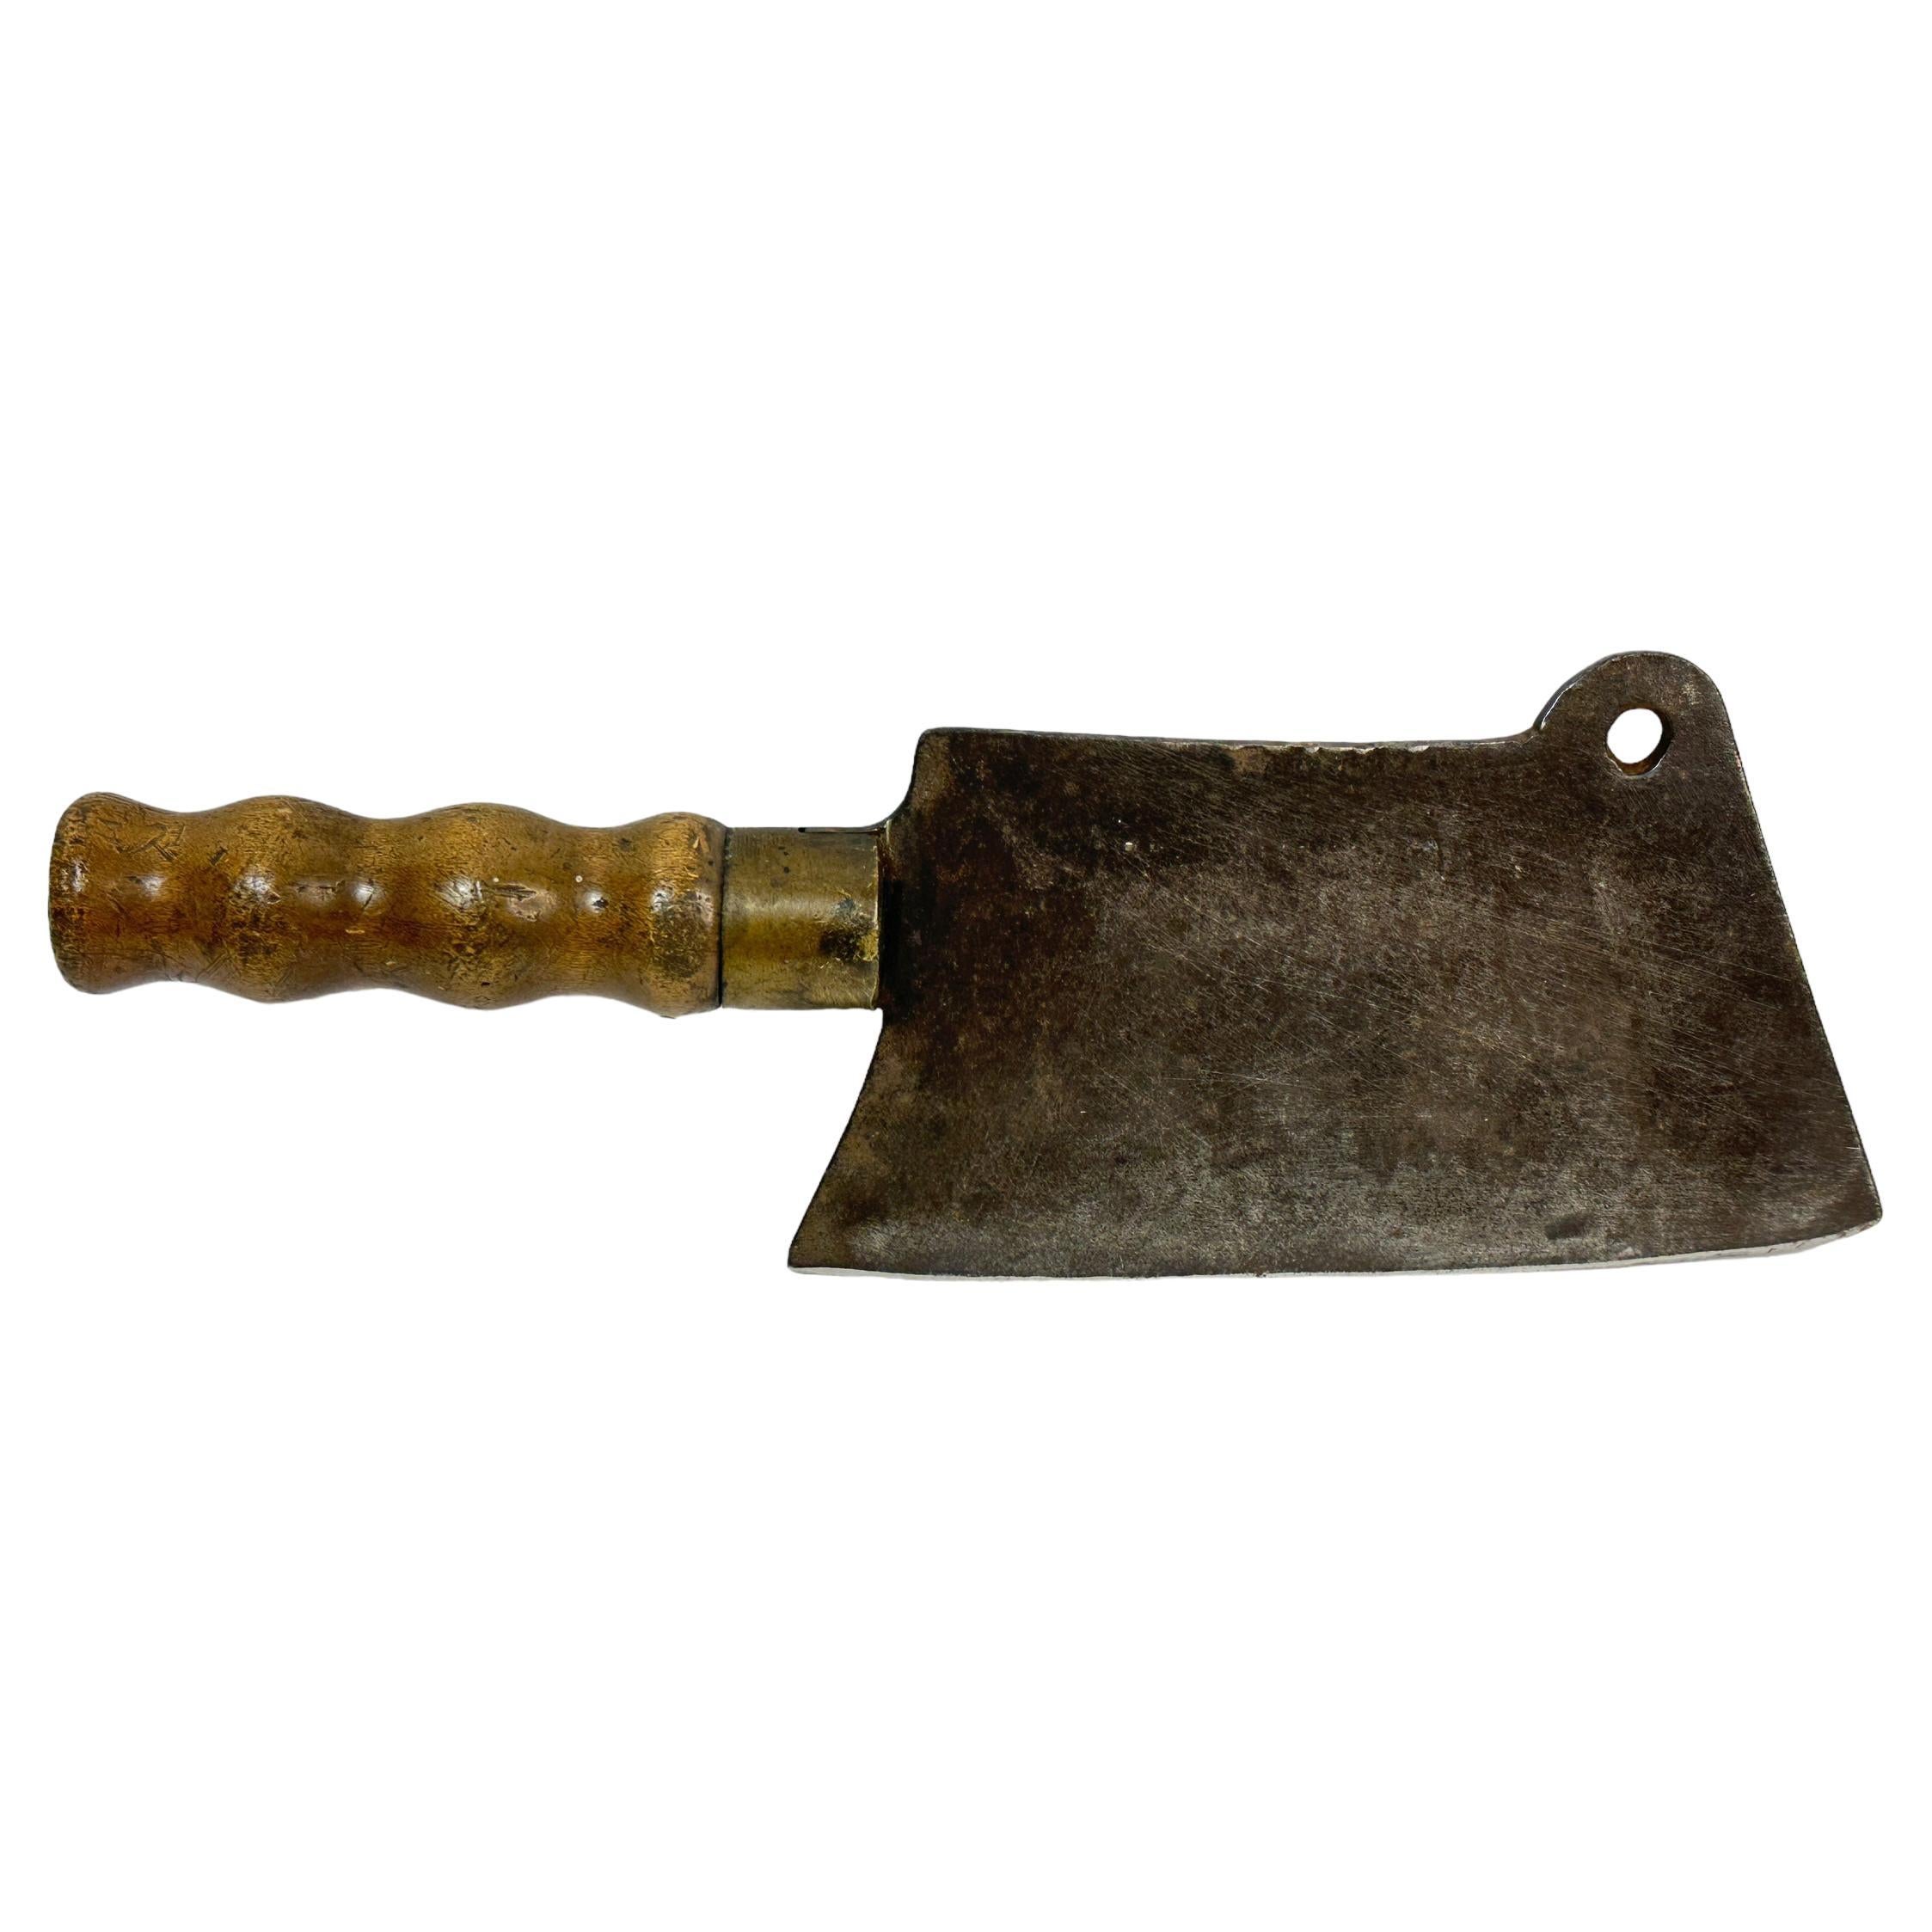 Highly Decorative 19th Century European German Cleaver, Kitchen Butcher Utensil For Sale